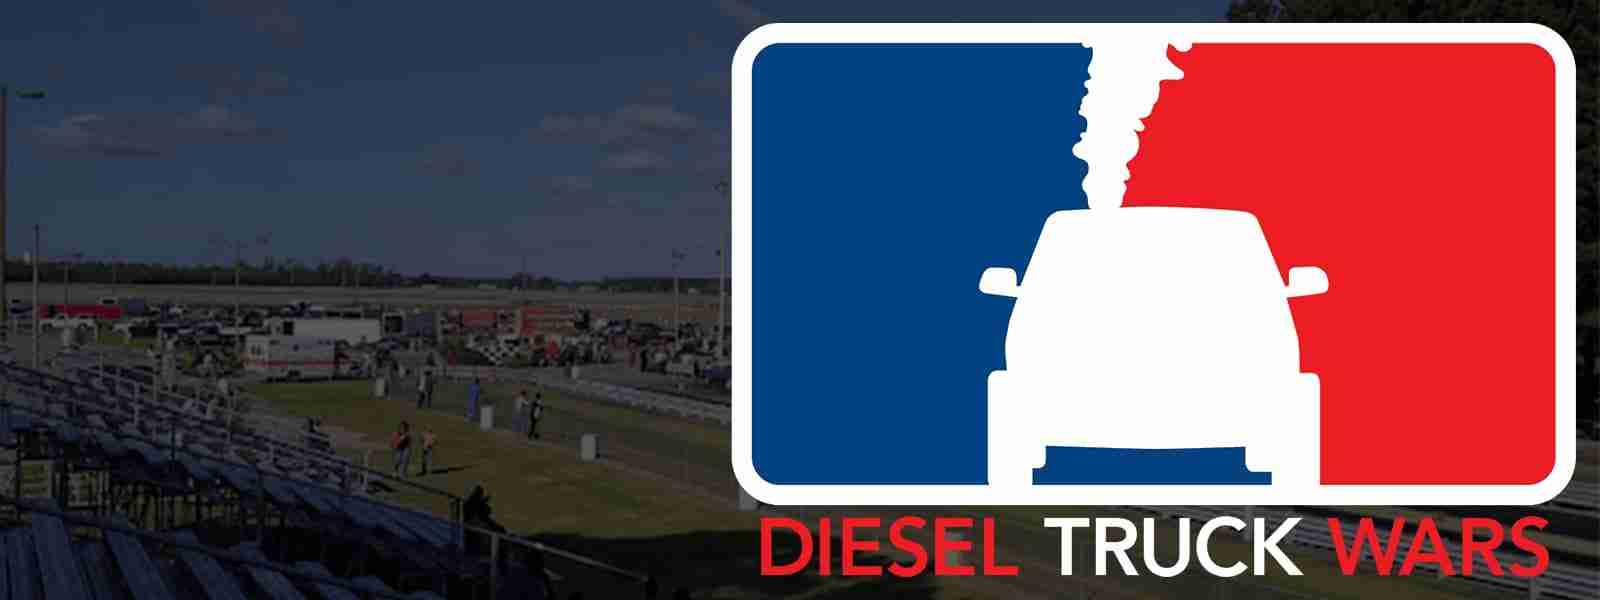 A blue and white logo for diesel truck racing.